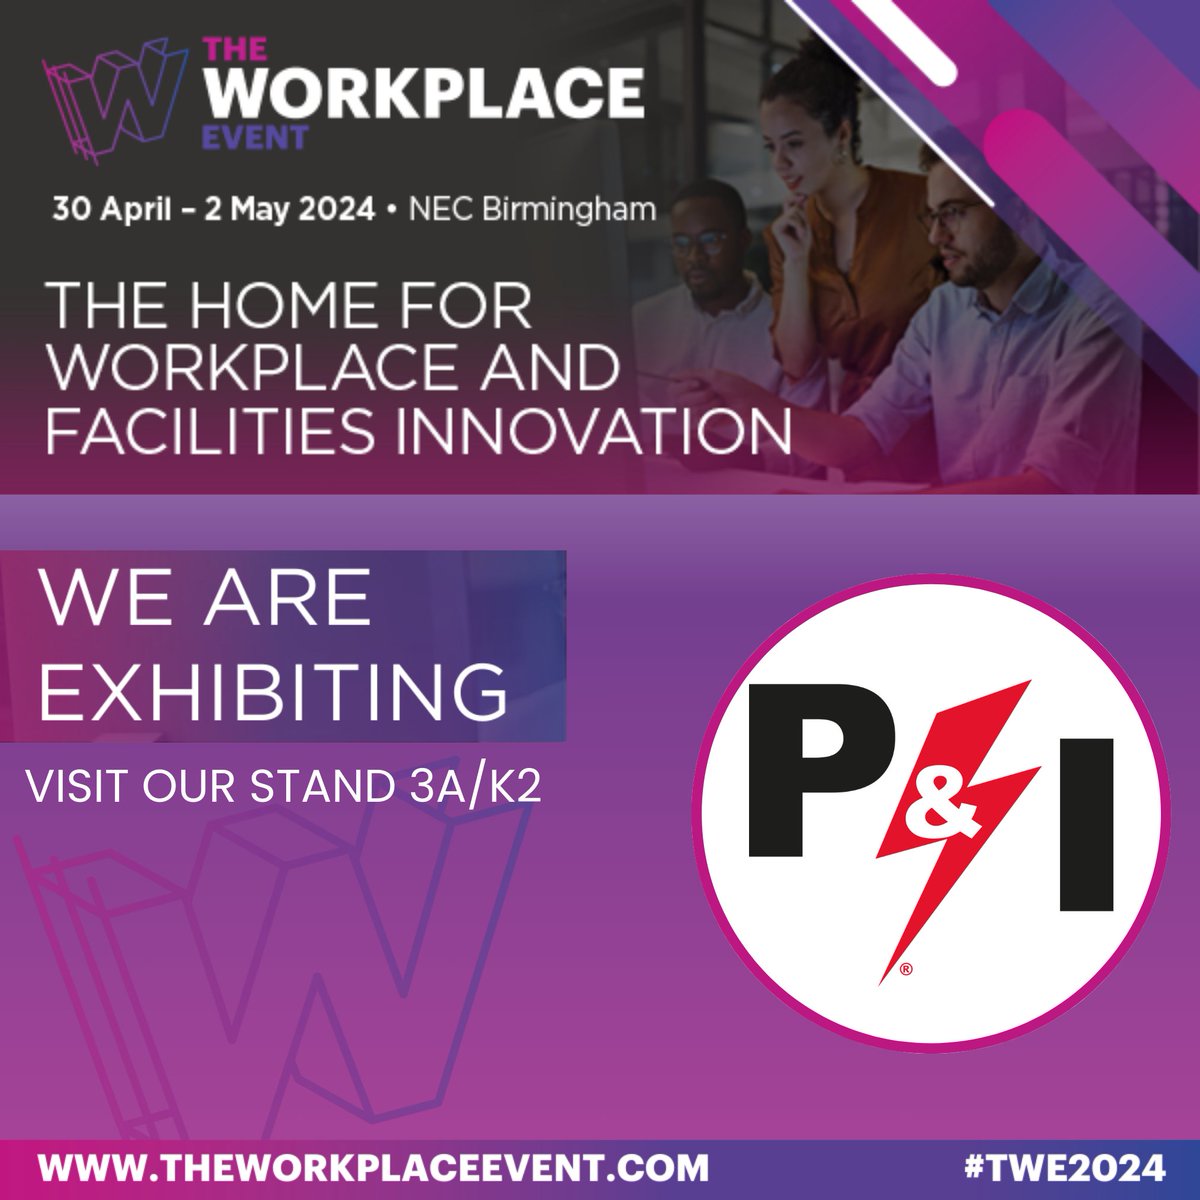 Tomorrow we are heading to the Workplace Event in Birmingham from 30th April to 2nd May 🏢✨

🤝 We can't wait to exchange ideas, explore innovations, and build meaningful connections.

Who will be attending?

@TheWorkplaceEvent

#TWE2024 #WorkplaceEvent #BirminghamExpo #Network